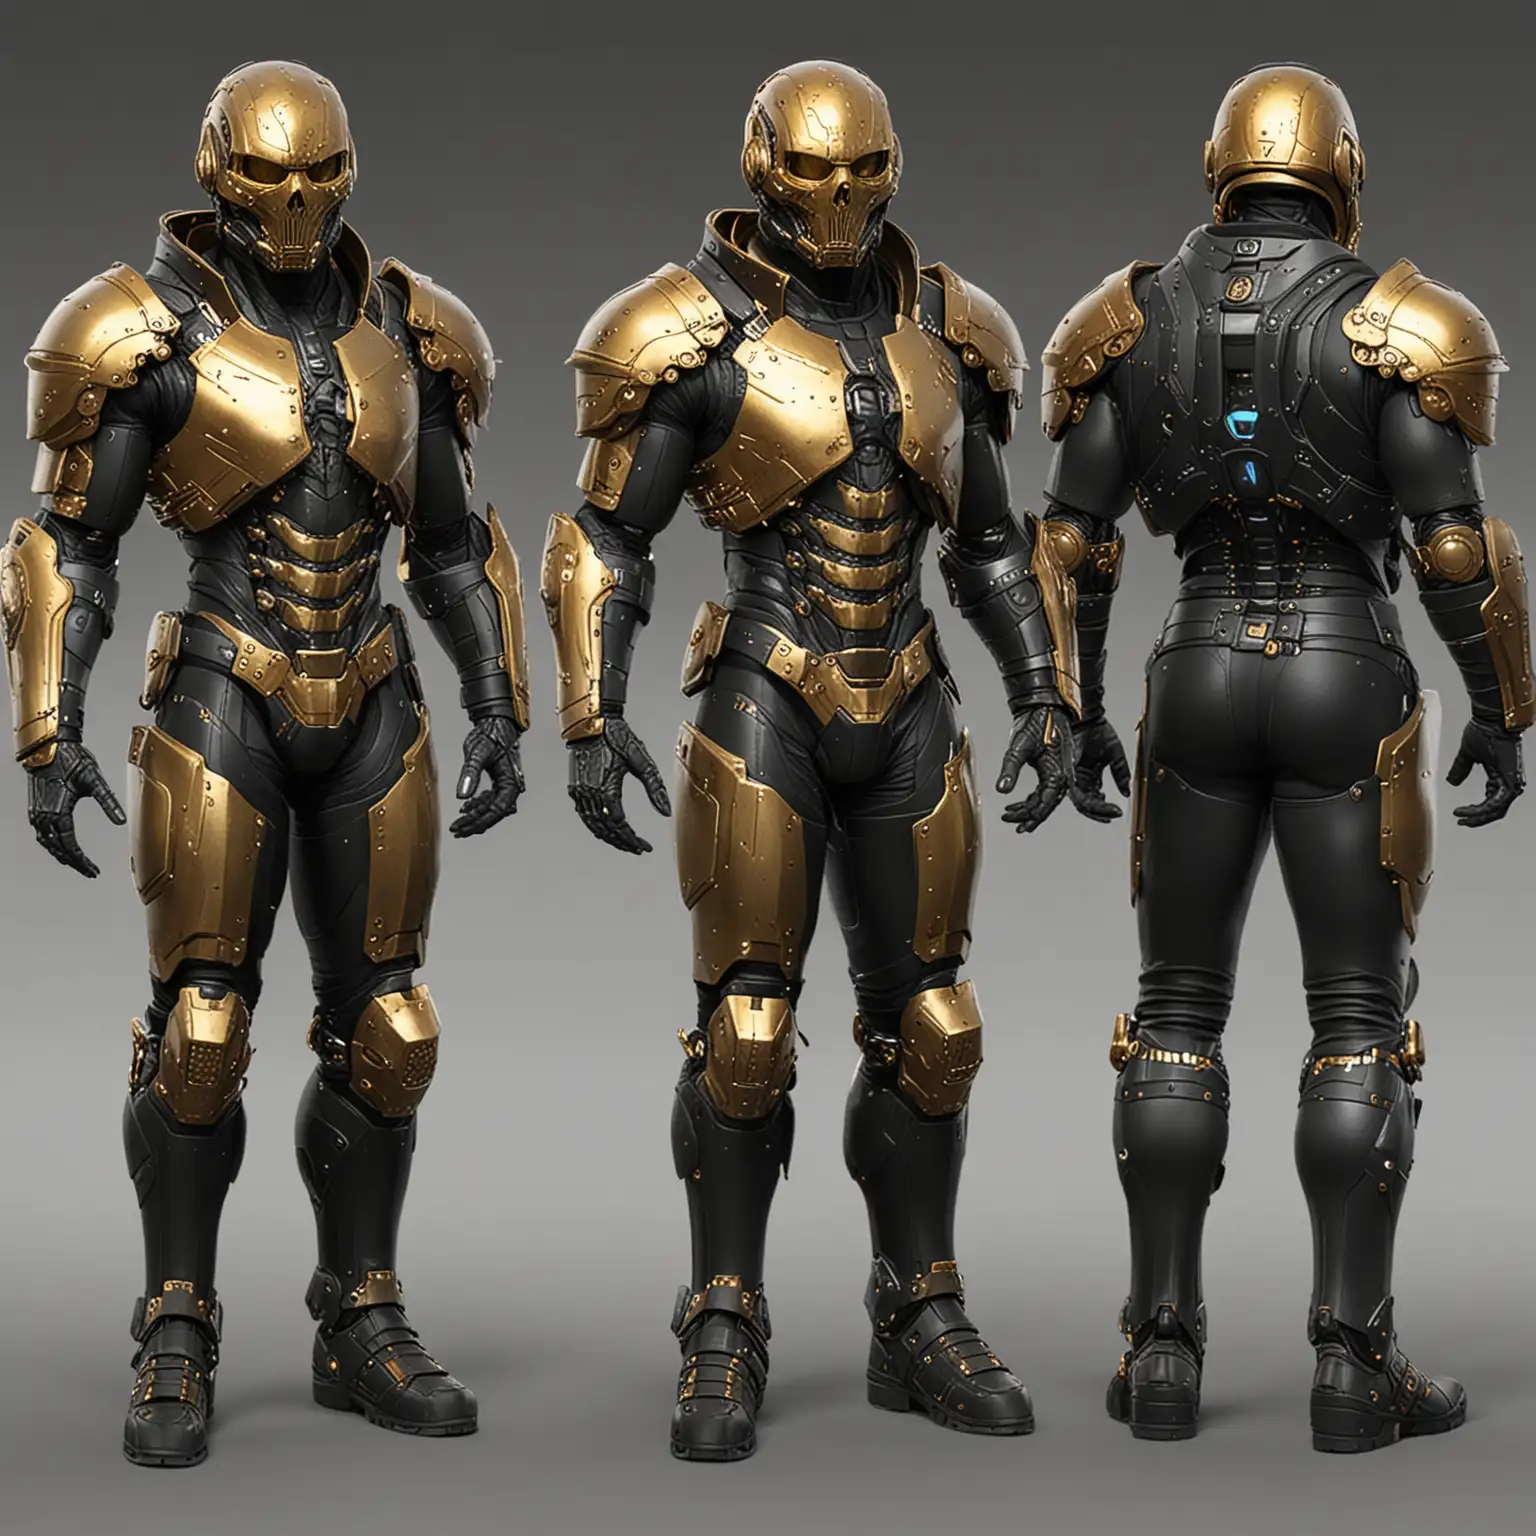 Full body concept art of a futuristic soldier with technological armor, the armor is gritty, with symbolism of skull's all over his armor and a golden deathmask helmet, please mix the armor up with intricate black gold and copper colors amongst the armor, the character has 2 poses, 1 pose is of the front of the character straight on and the other pose is of the character from behind, can you make both sides of the character match in terms of size and detail, ensuring that everything matches up properly